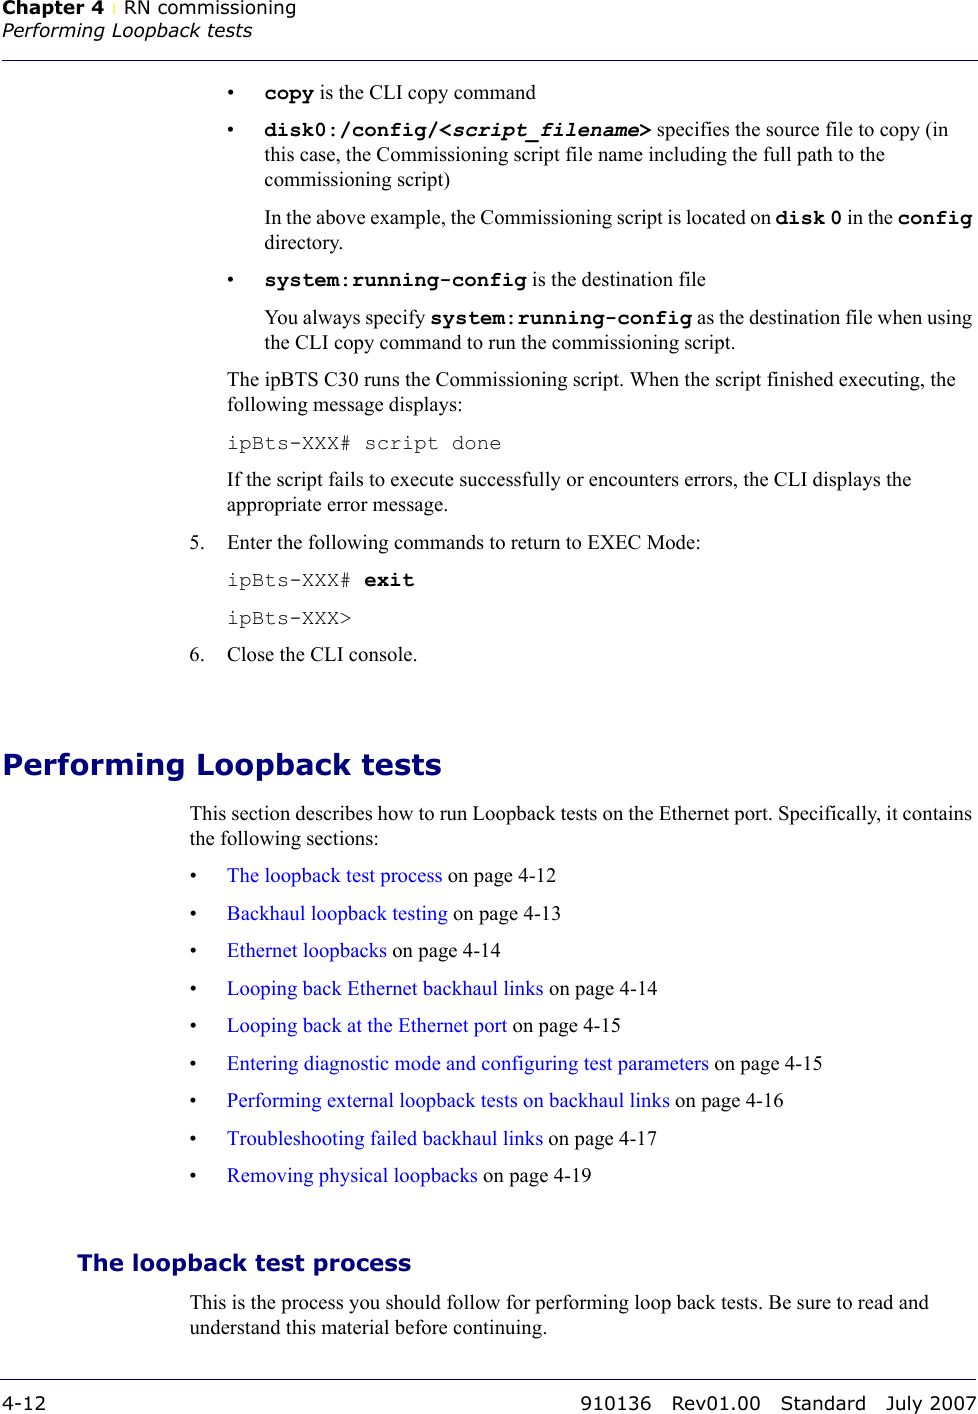 Chapter 4 lRN commissioningPerforming Loopback tests4-12 910136 Rev01.00 Standard July 2007•copy is the CLI copy command•disk0:/config/&lt;script_filename&gt; specifies the source file to copy (in this case, the Commissioning script file name including the full path to the commissioning script)In the above example, the Commissioning script is located on disk 0 in the config directory.•system:running-config is the destination fileYou always specify system:running-config as the destination file when using the CLI copy command to run the commissioning script.The ipBTS C30 runs the Commissioning script. When the script finished executing, the following message displays:ipBts-XXX# script doneIf the script fails to execute successfully or encounters errors, the CLI displays the appropriate error message.5. Enter the following commands to return to EXEC Mode:ipBts-XXX# exitipBts-XXX&gt;6. Close the CLI console.Performing Loopback testsThis section describes how to run Loopback tests on the Ethernet port. Specifically, it contains the following sections:•The loopback test process on page 4-12•Backhaul loopback testing on page 4-13•Ethernet loopbacks on page 4-14•Looping back Ethernet backhaul links on page 4-14•Looping back at the Ethernet port on page 4-15•Entering diagnostic mode and configuring test parameters on page 4-15•Performing external loopback tests on backhaul links on page 4-16•Troubleshooting failed backhaul links on page 4-17•Removing physical loopbacks on page 4-19The loopback test processThis is the process you should follow for performing loop back tests. Be sure to read and understand this material before continuing.